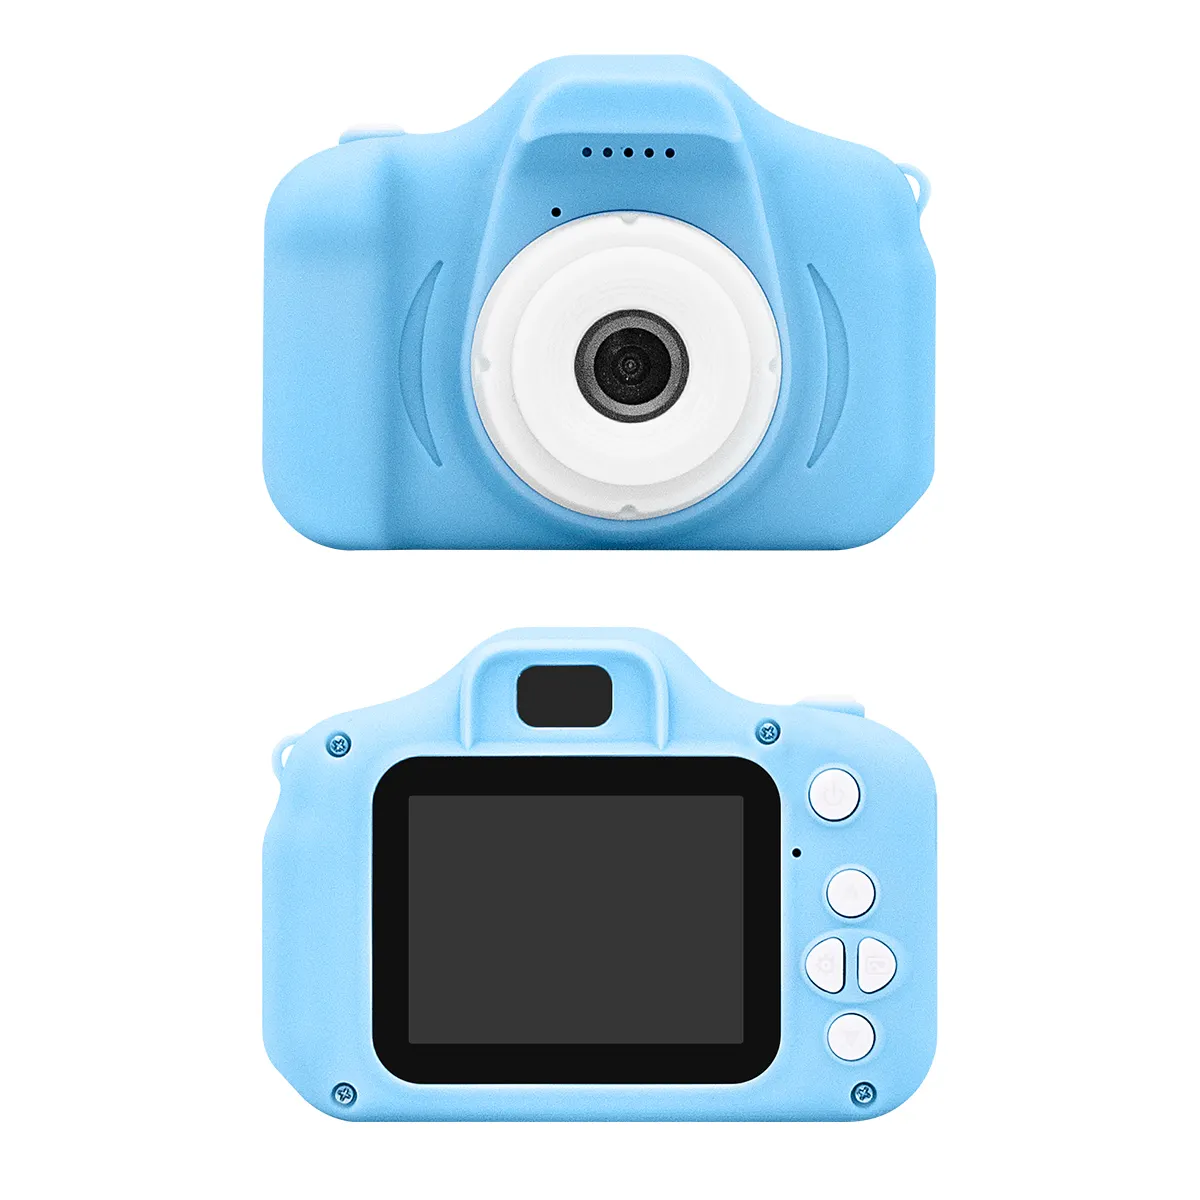 New arrival camera instant kids video camera for kids